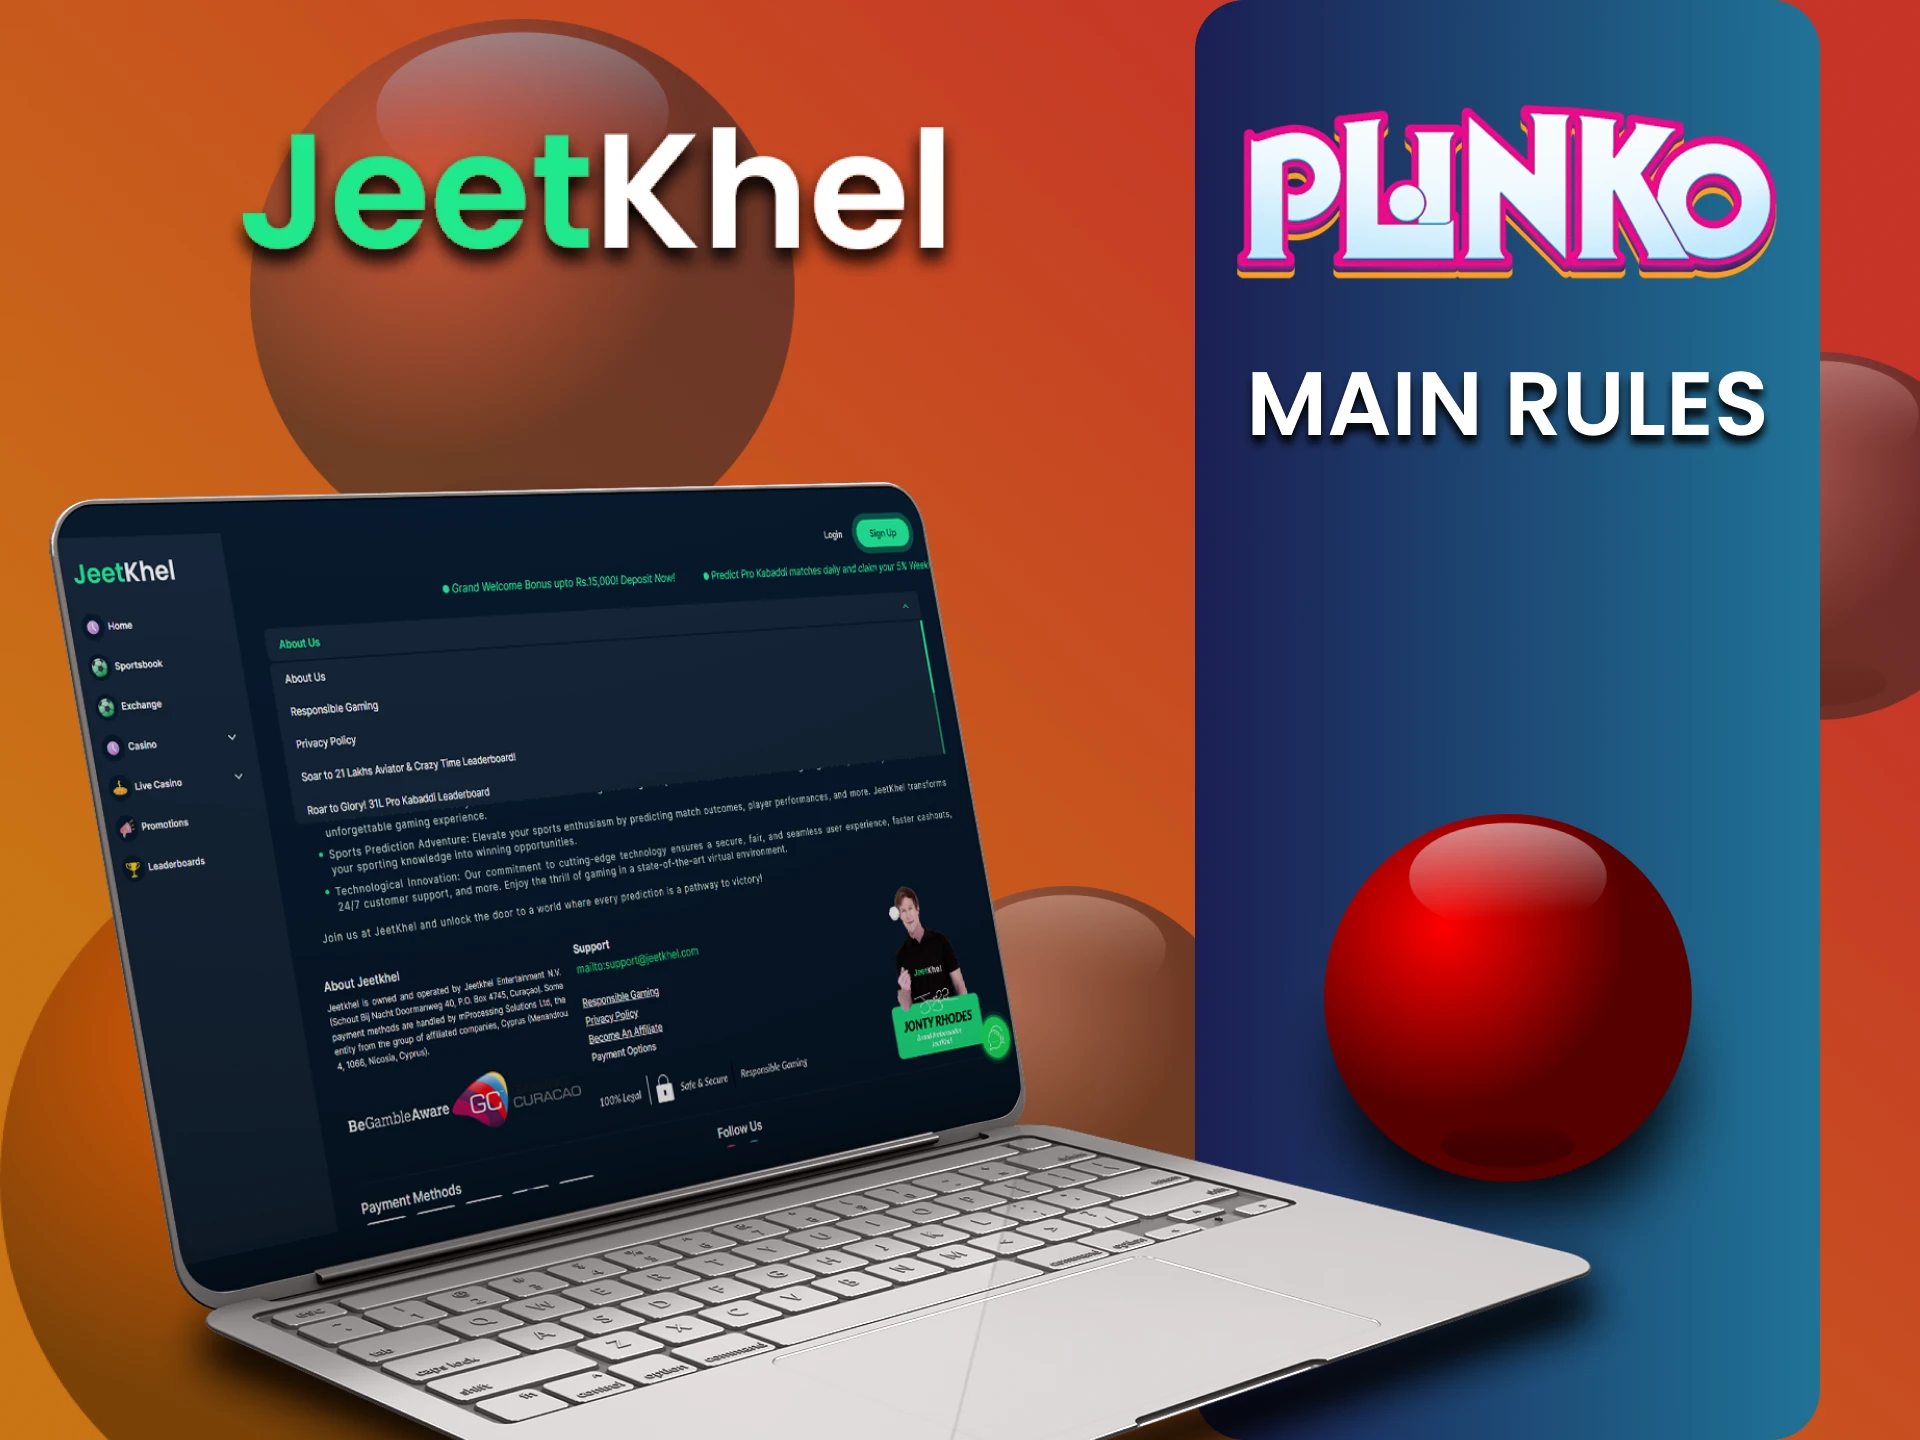 Learn the terms of use on the JeetKhel website for playing Plinko.